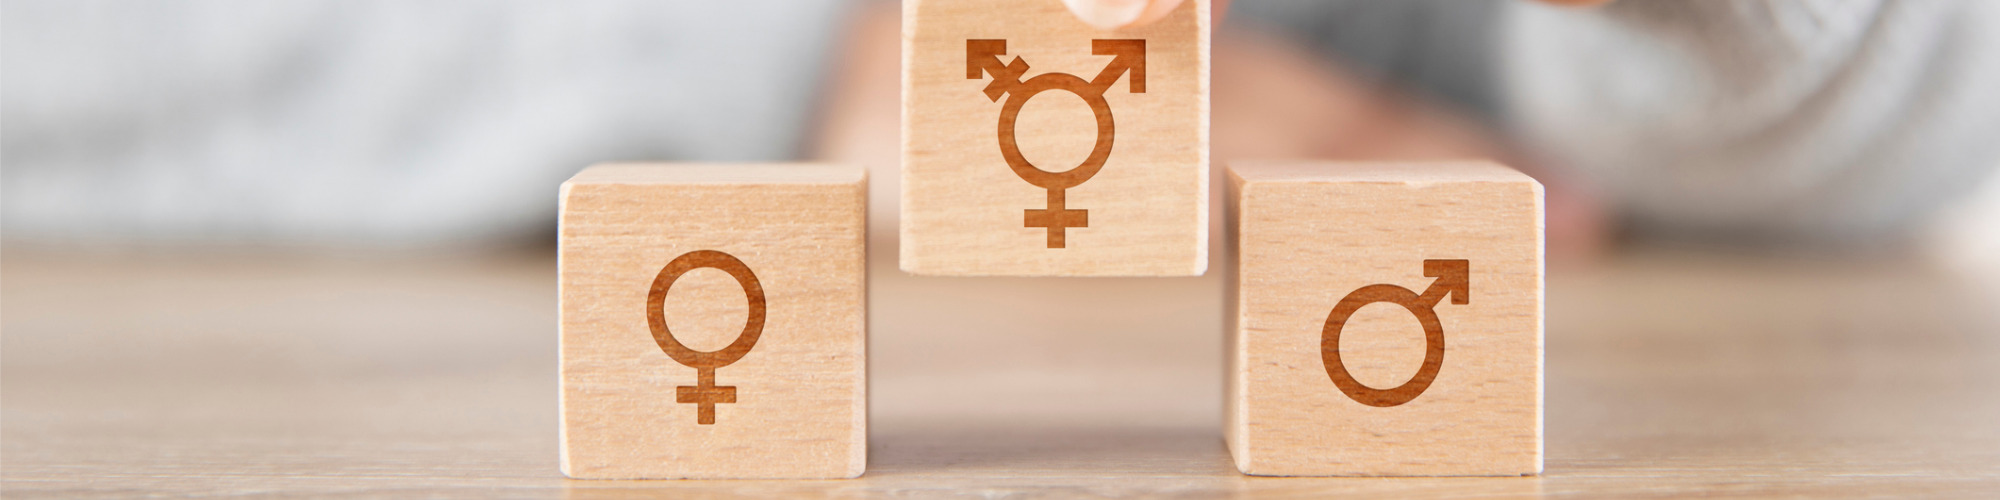 Gender Recognition Certificates - A Bite Sized Guide for Family Lawyers 